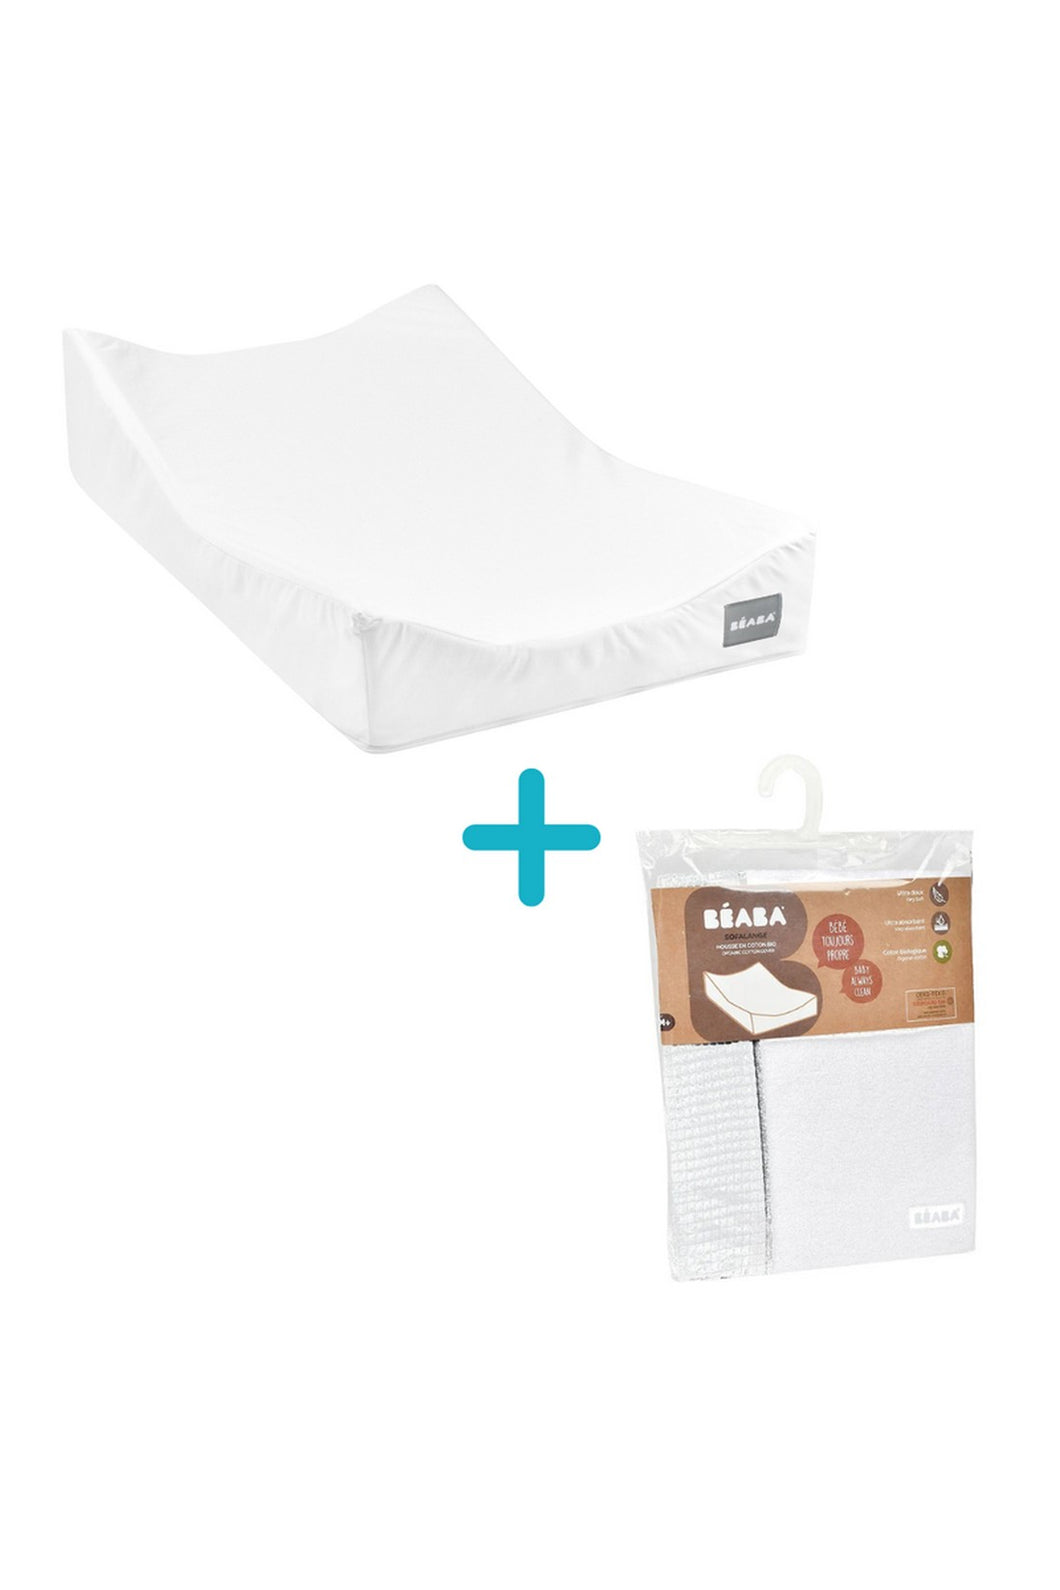 Beaba Sofalange Changing Mat and Fitted Sheet